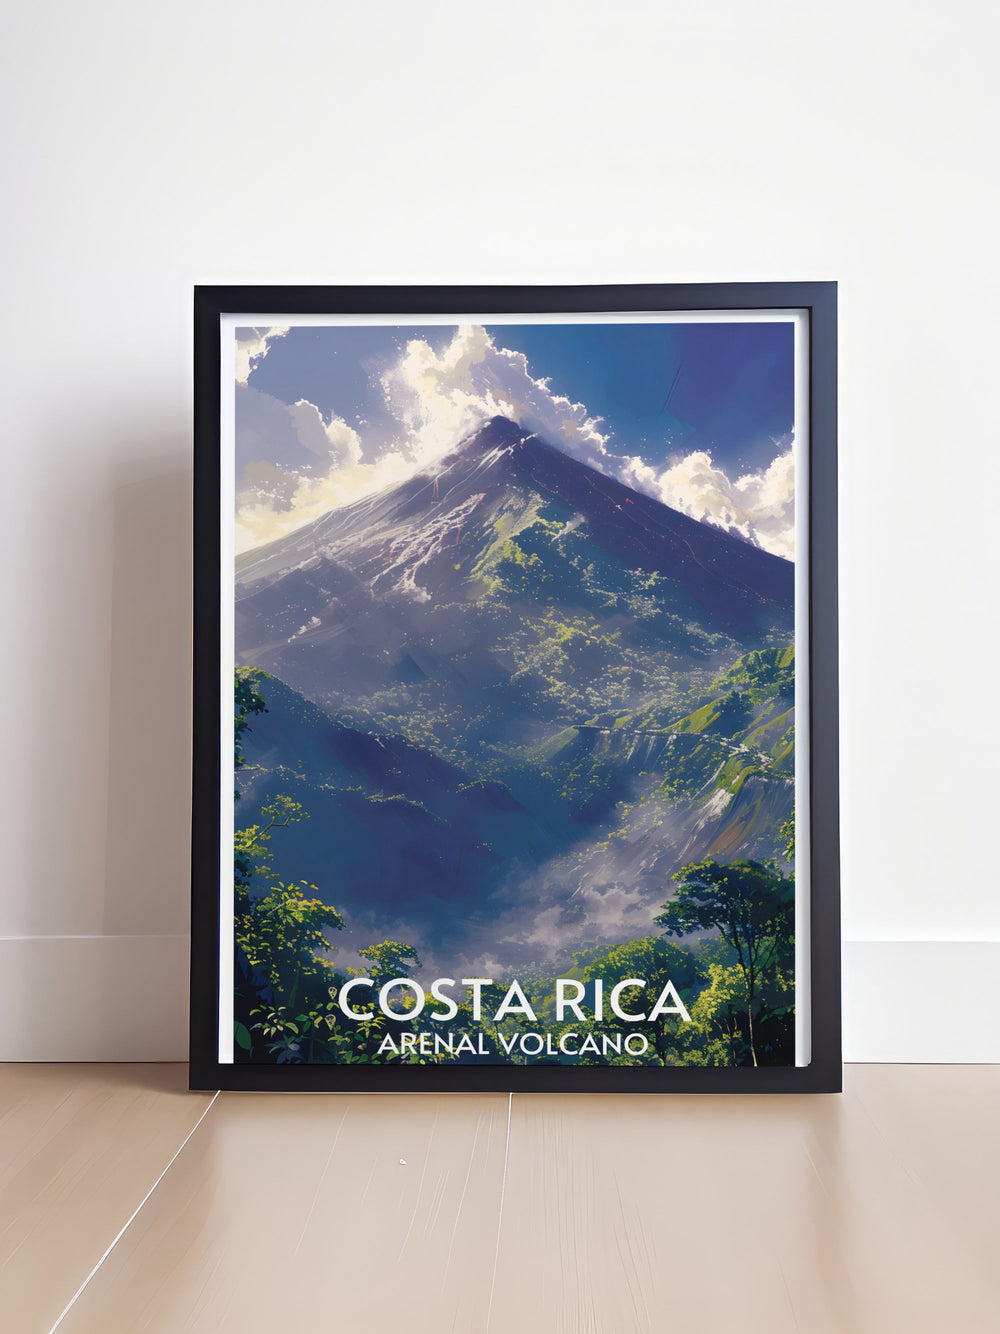 Arenal Volcano during a clear day, its imposing silhouette set against a crisp blue sky in this breathtaking poster.